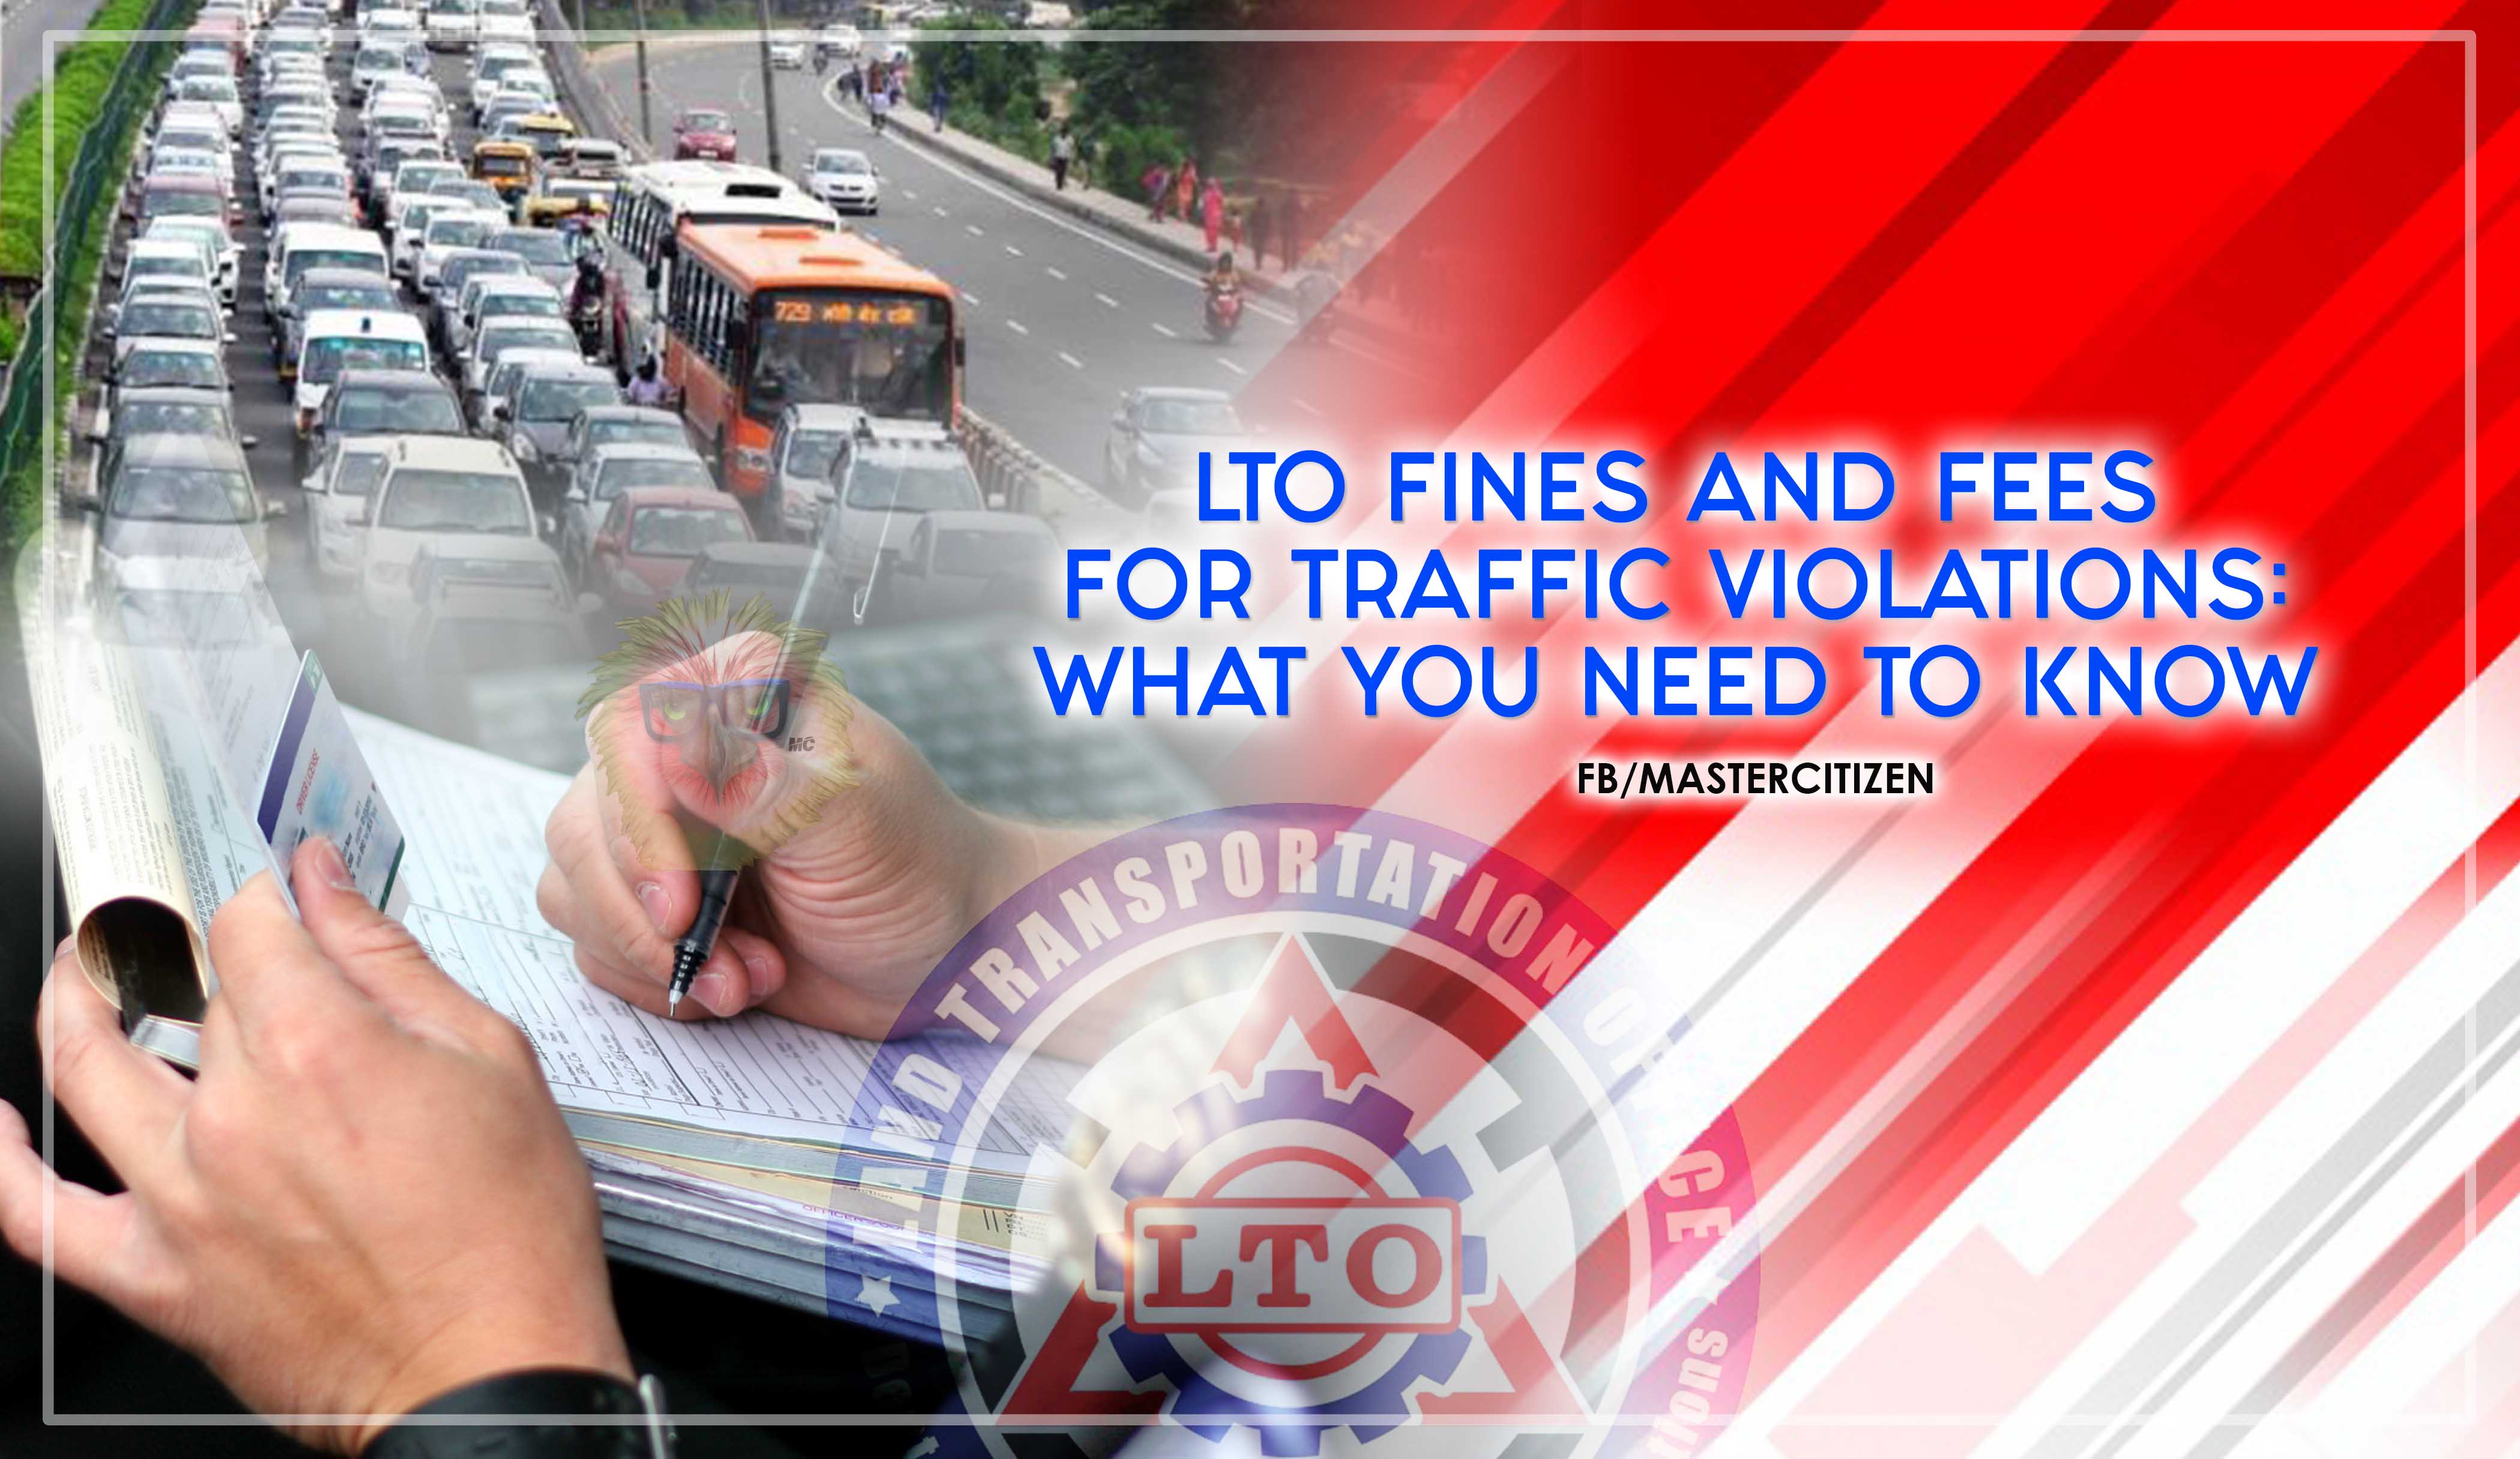 LTO Fines and Fees for Traffic Violations: What You Need to Know